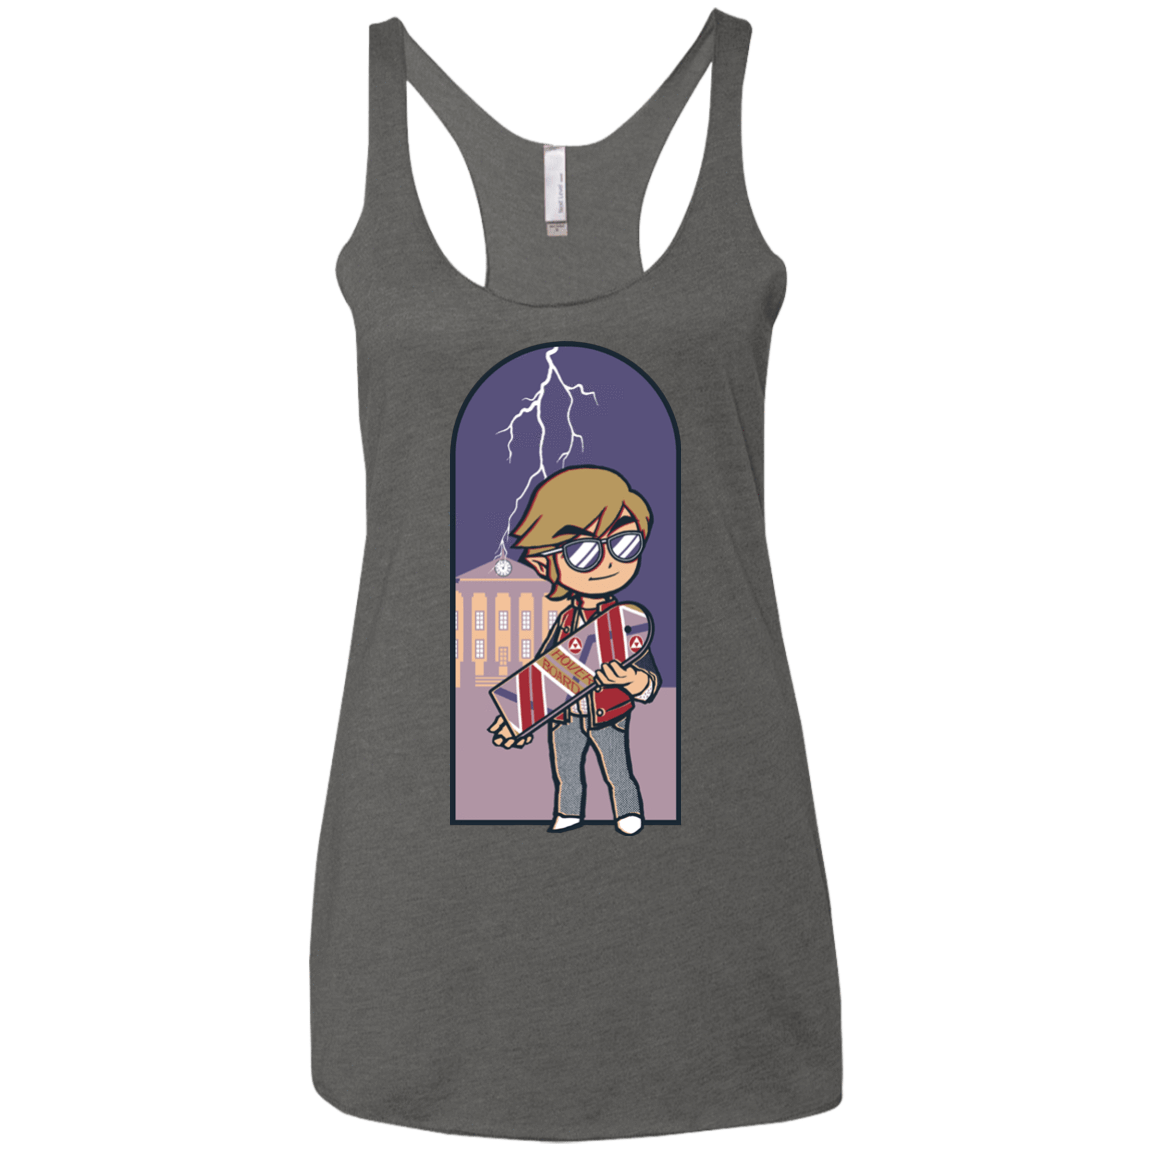 T-Shirts Premium Heather / X-Small A Link to The Future Women's Triblend Racerback Tank